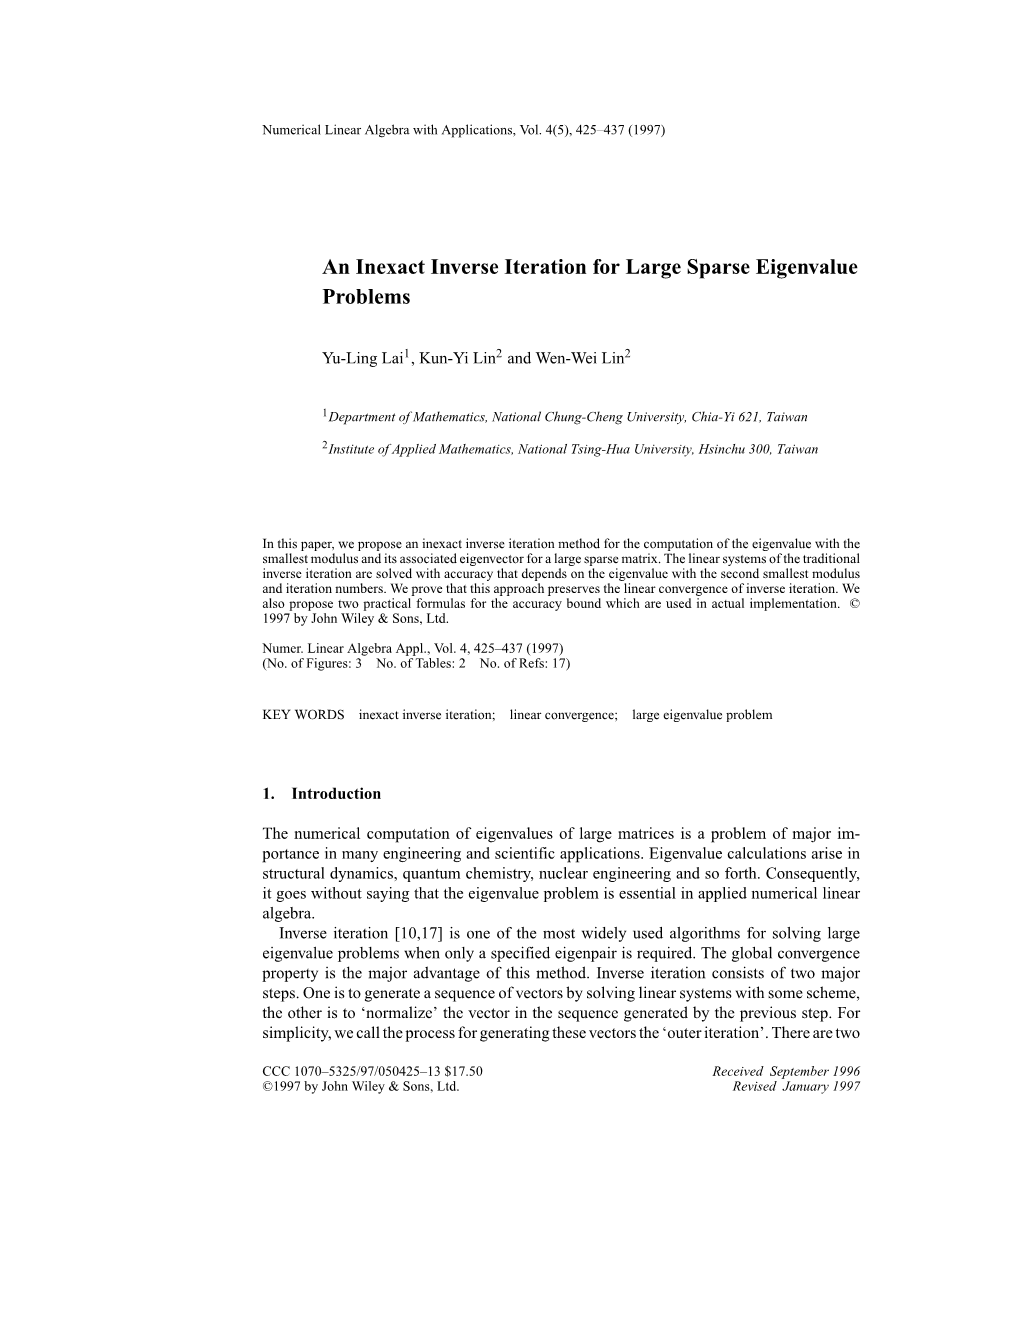 An Inexact Inverse Iteration for Large Sparse Eigenvalue Problems